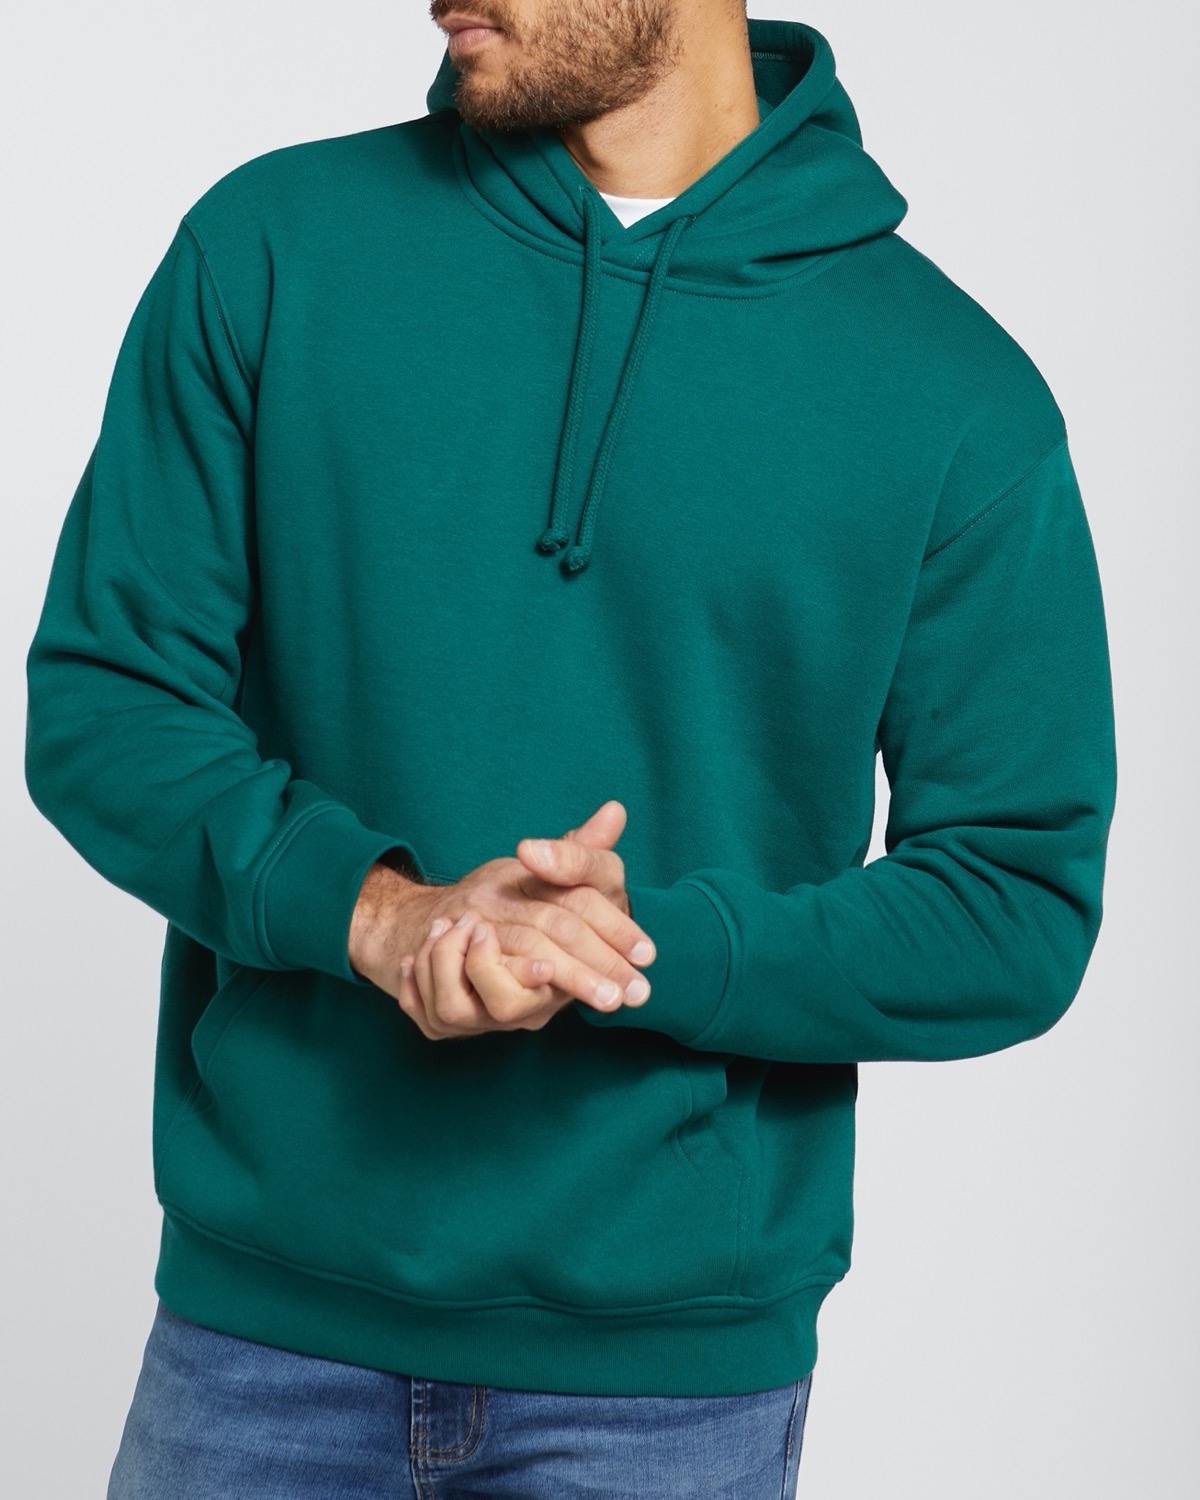 Relaxed Fit Hoodie - Light green - Men